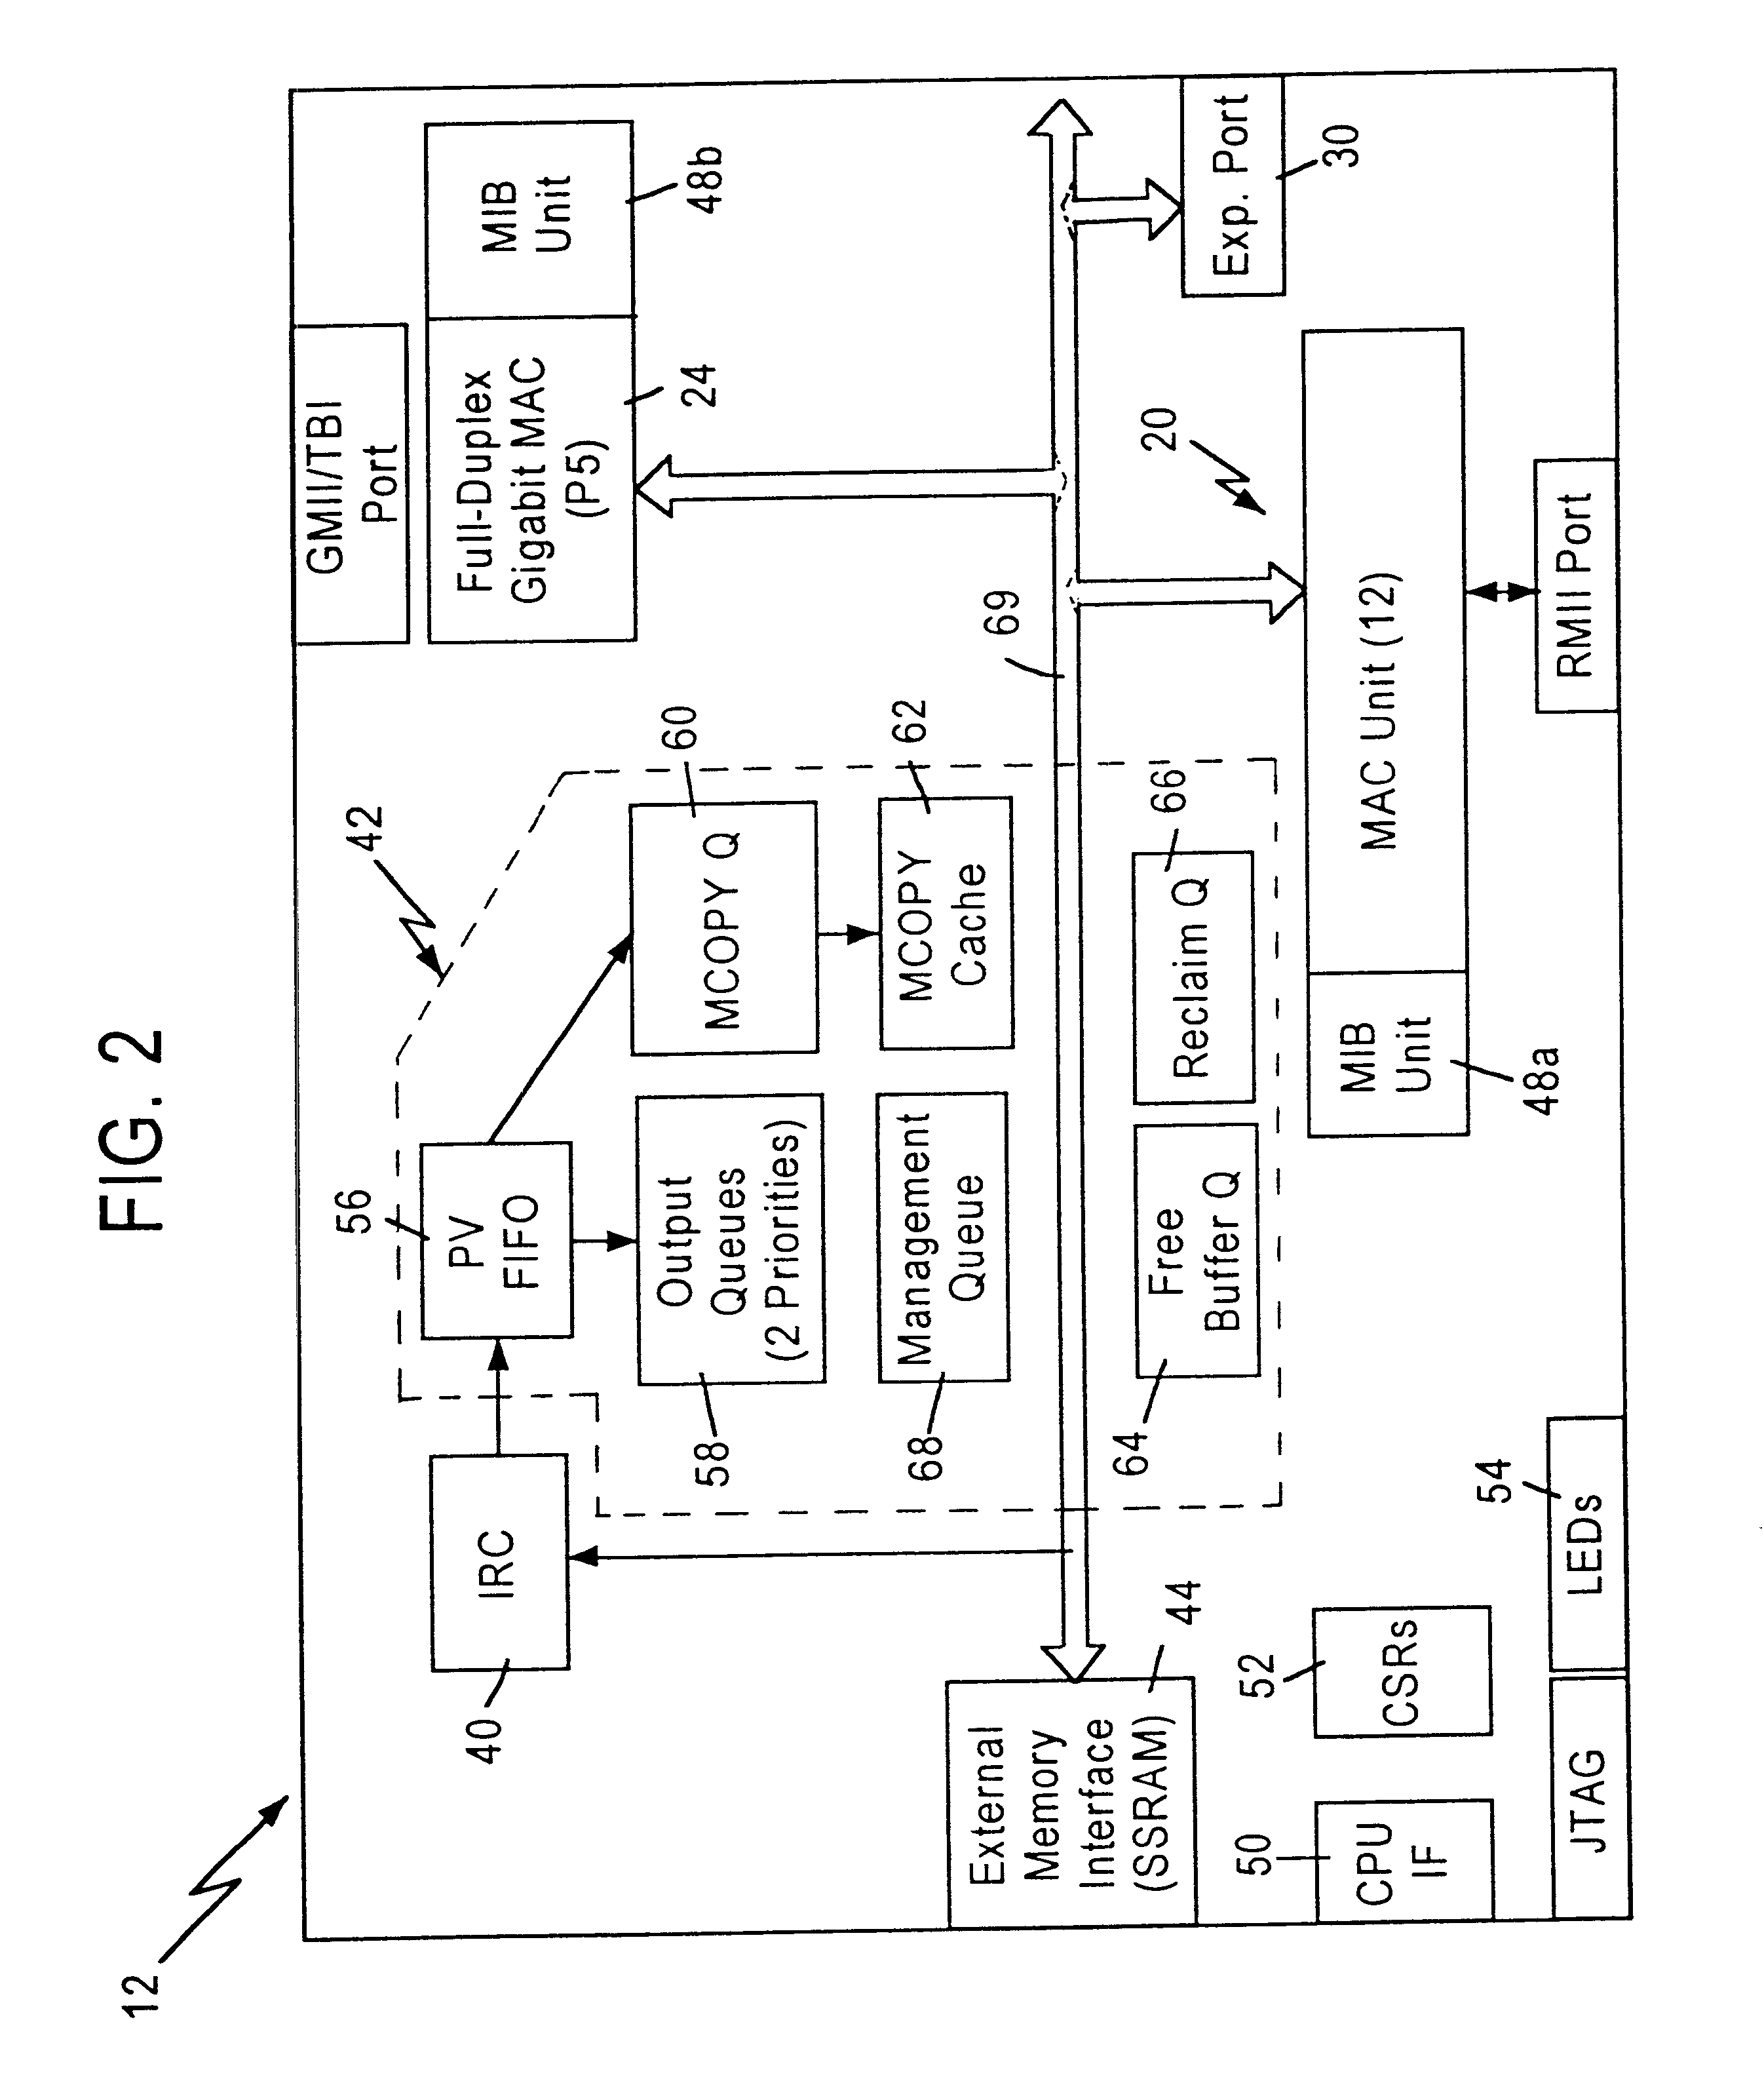 Method and apparatus for controlling the flow of data frames through a network switch on a port-by-port basis